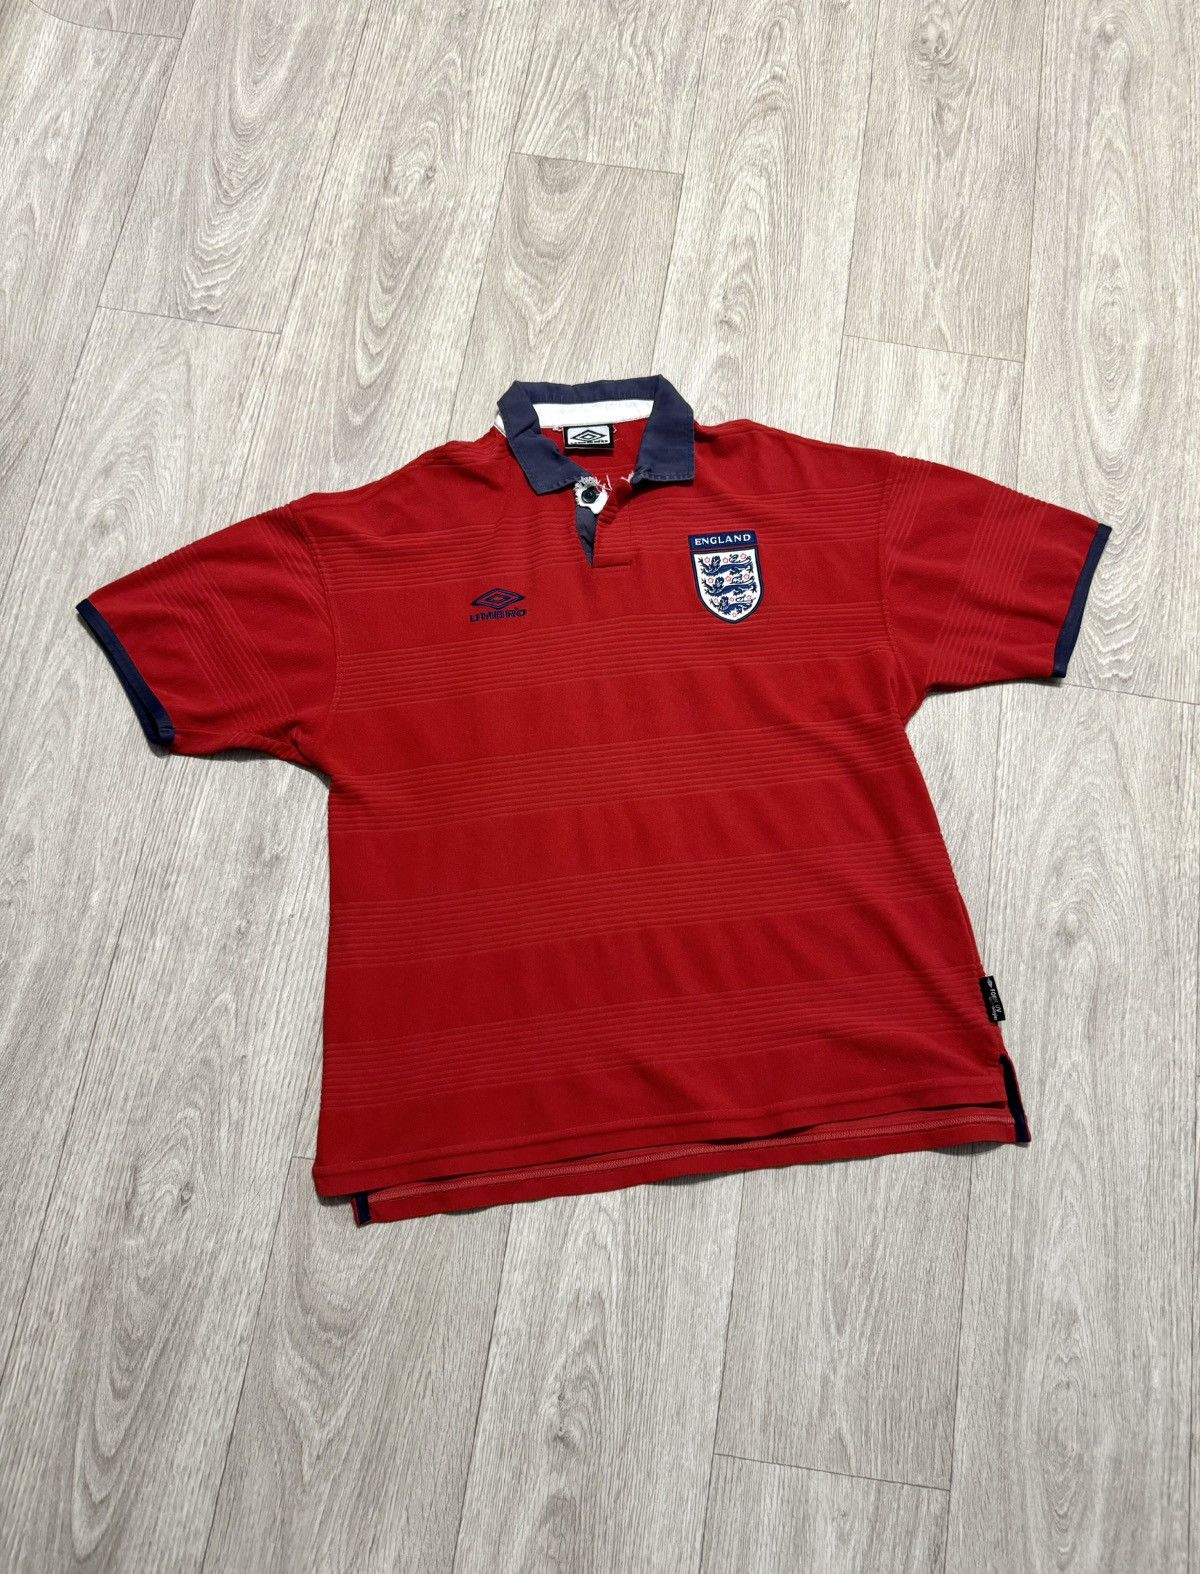 Pre-owned Soccer Jersey X Umbro Vintage Umbro England 1999/01 Soccer Jersey In Red